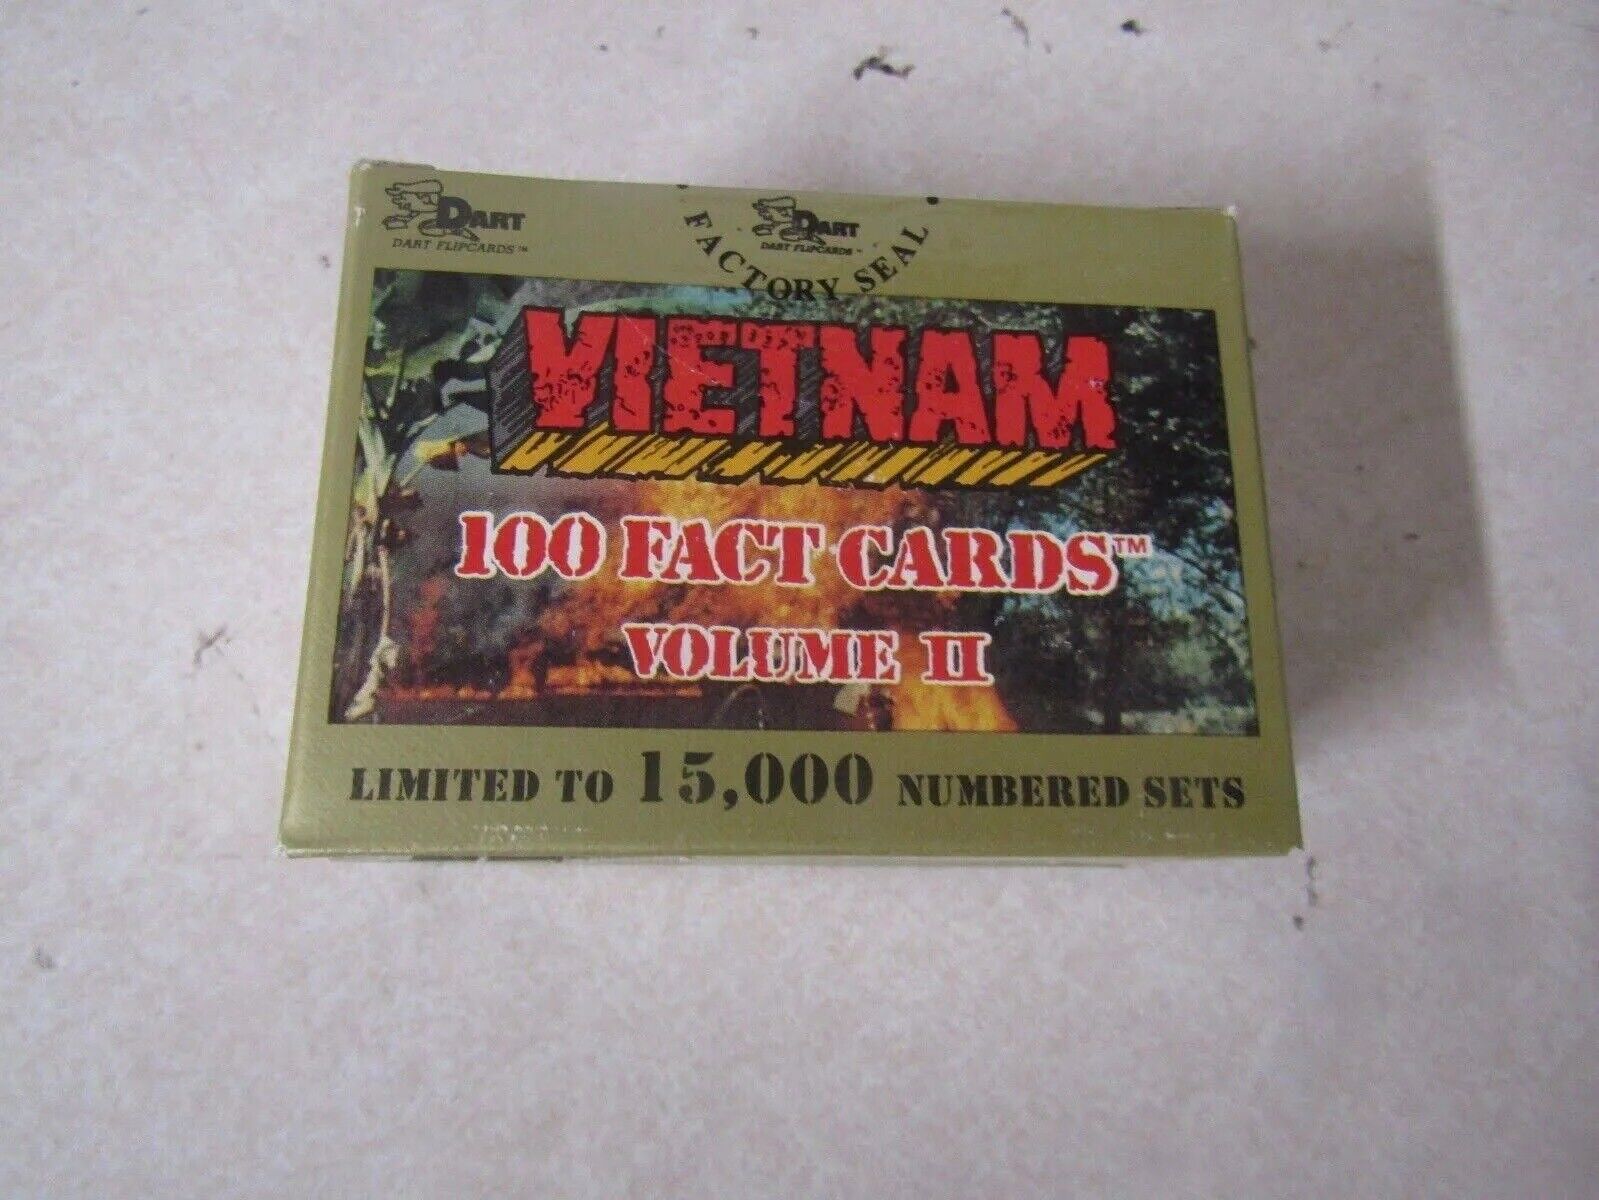 1991 Dart Flipcards, “VIETNAM” Fact Cards Vol.2, #1 to 100 Comp, Factory Sealed